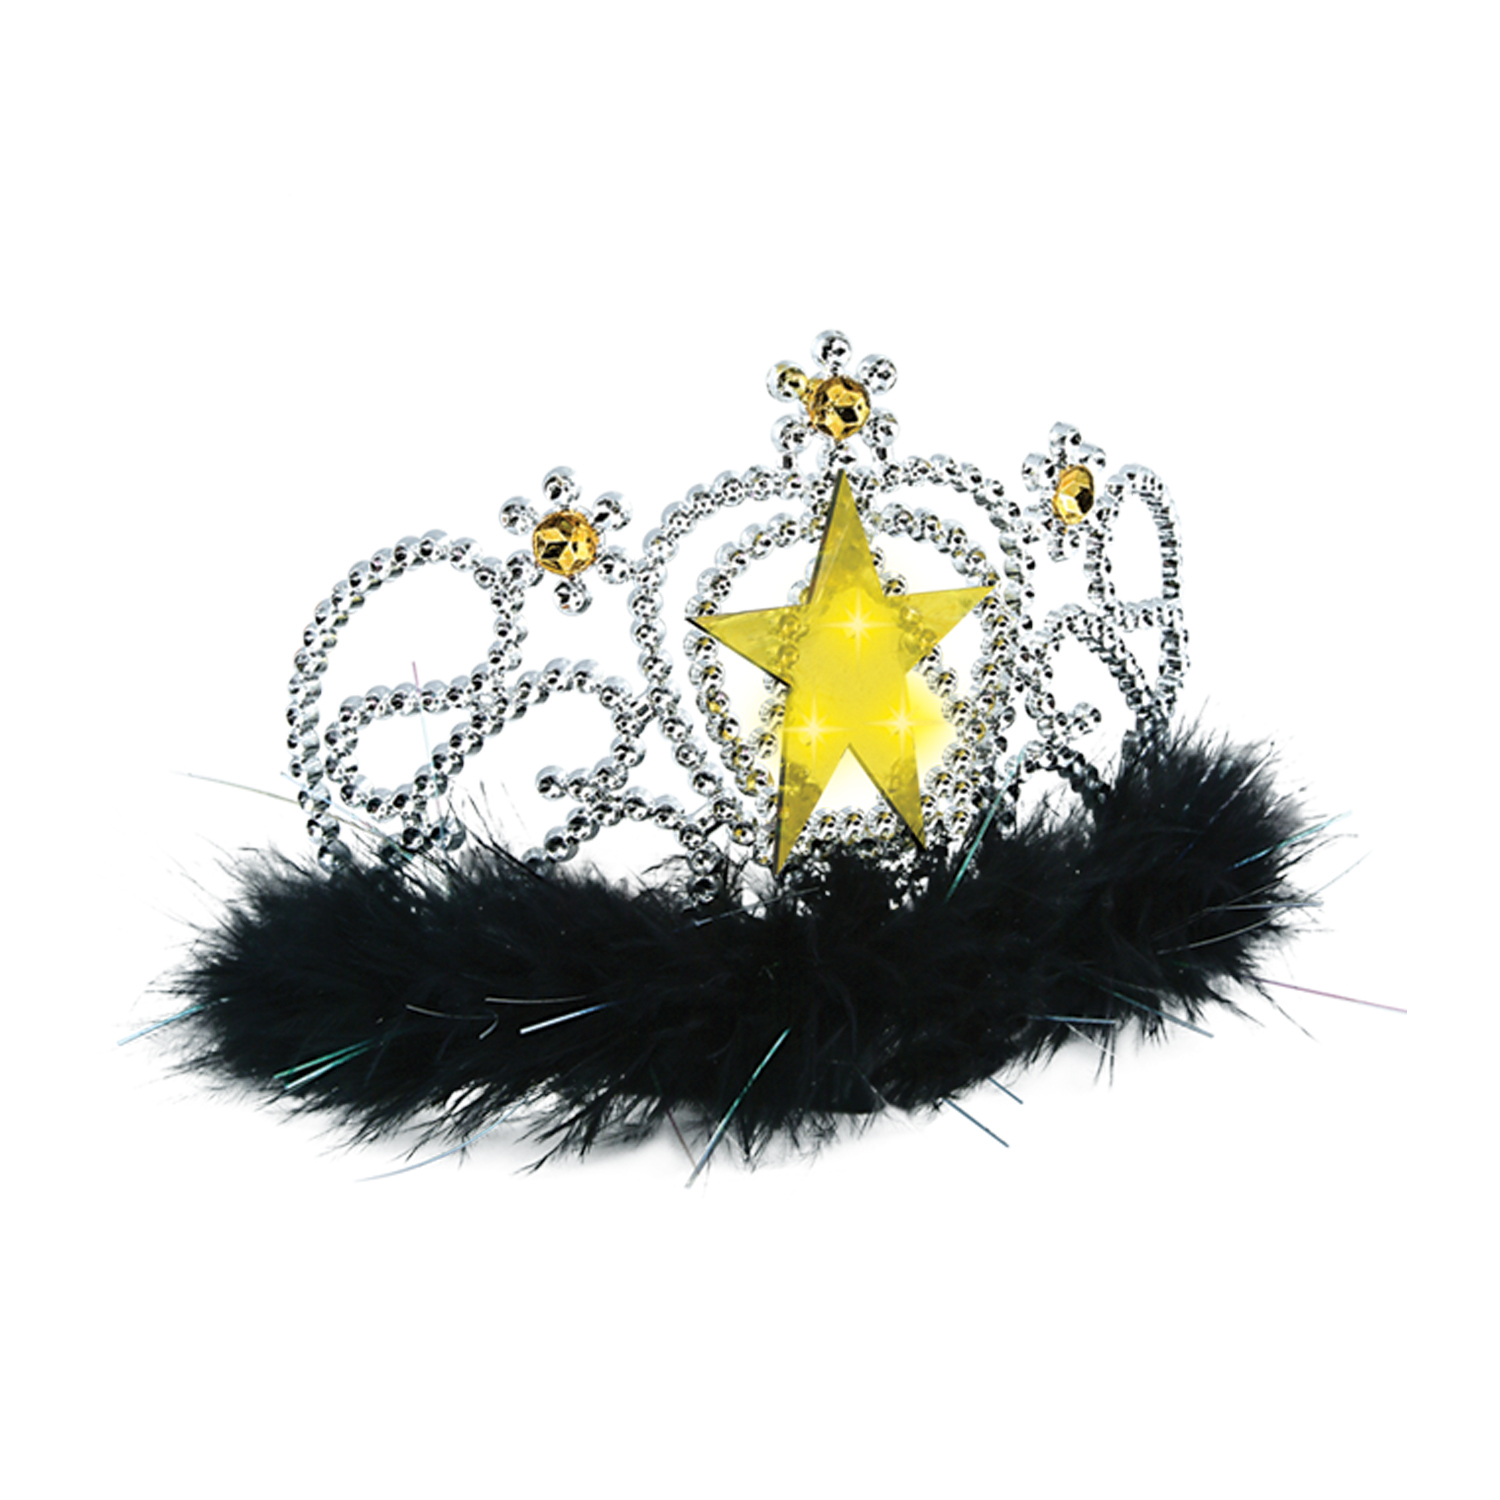 Silver plastic tiara with feathered bottom and gold stars and accents.